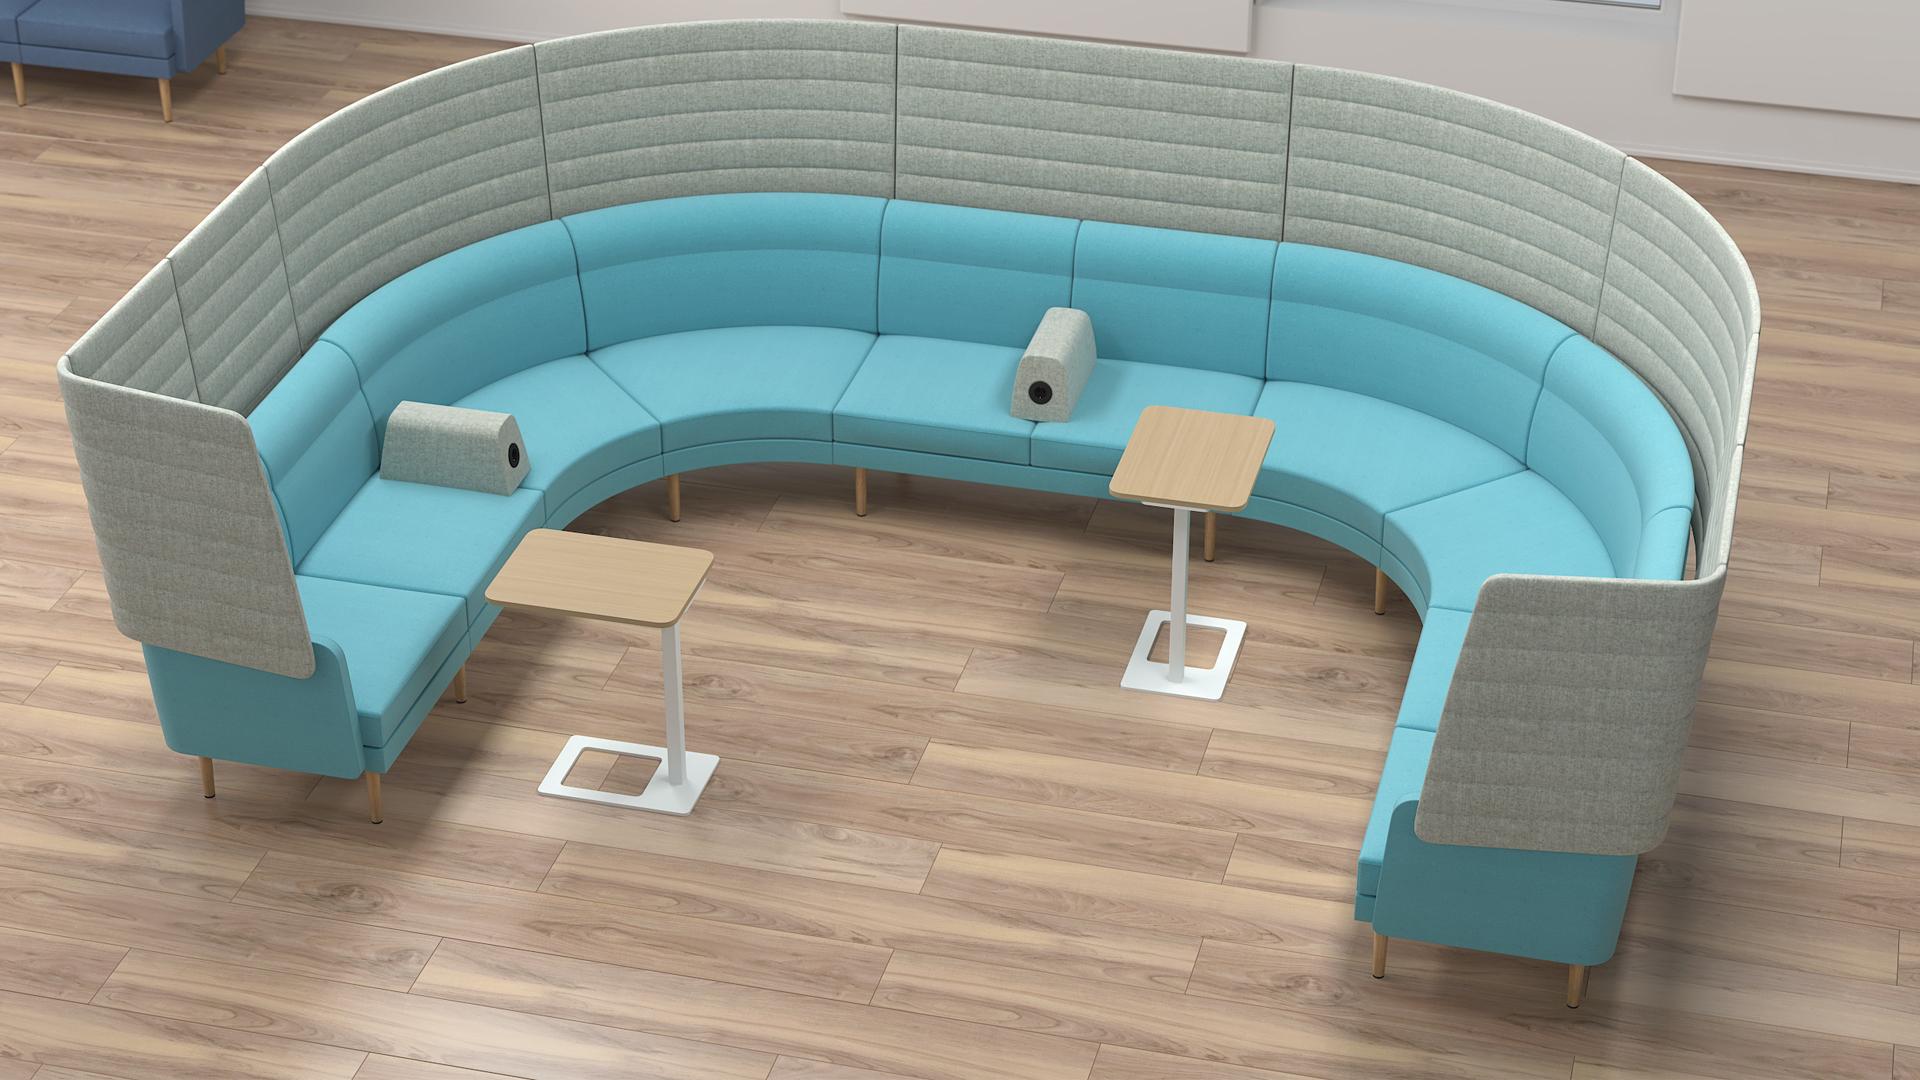 Arcipelago modular soft seating offers endless configurations